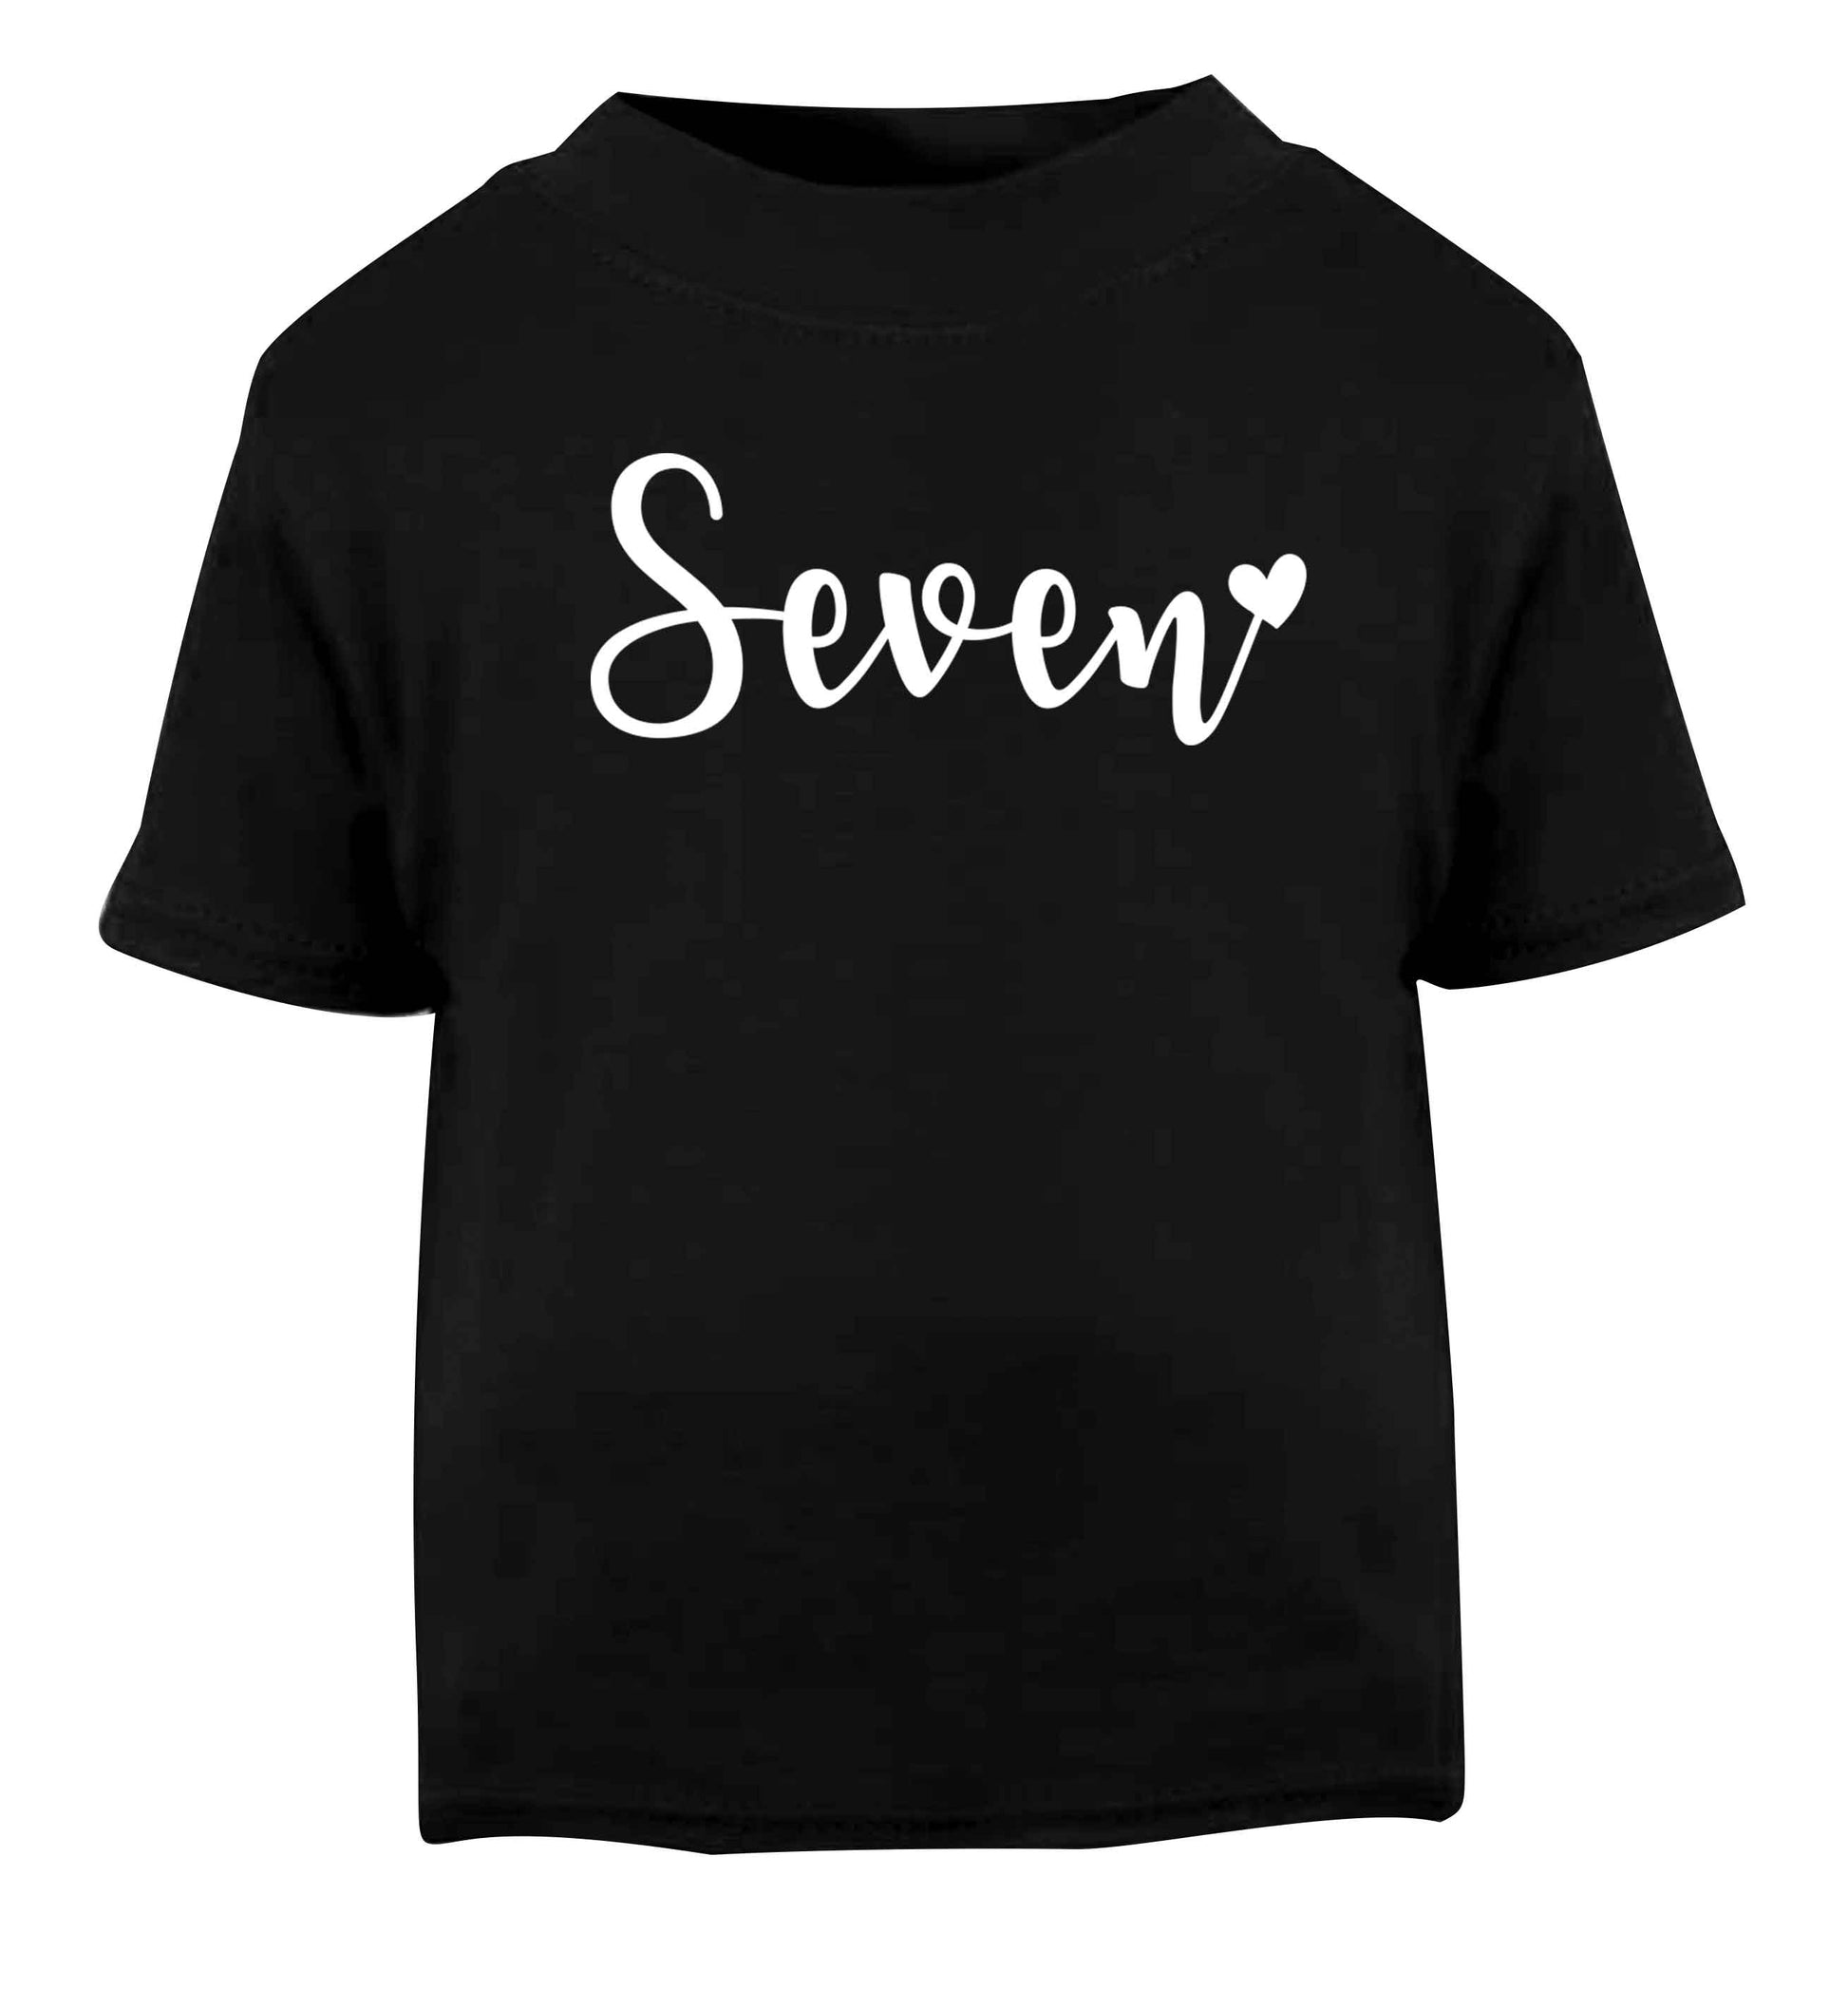 Seven and heart Black baby toddler Tshirt 2 years